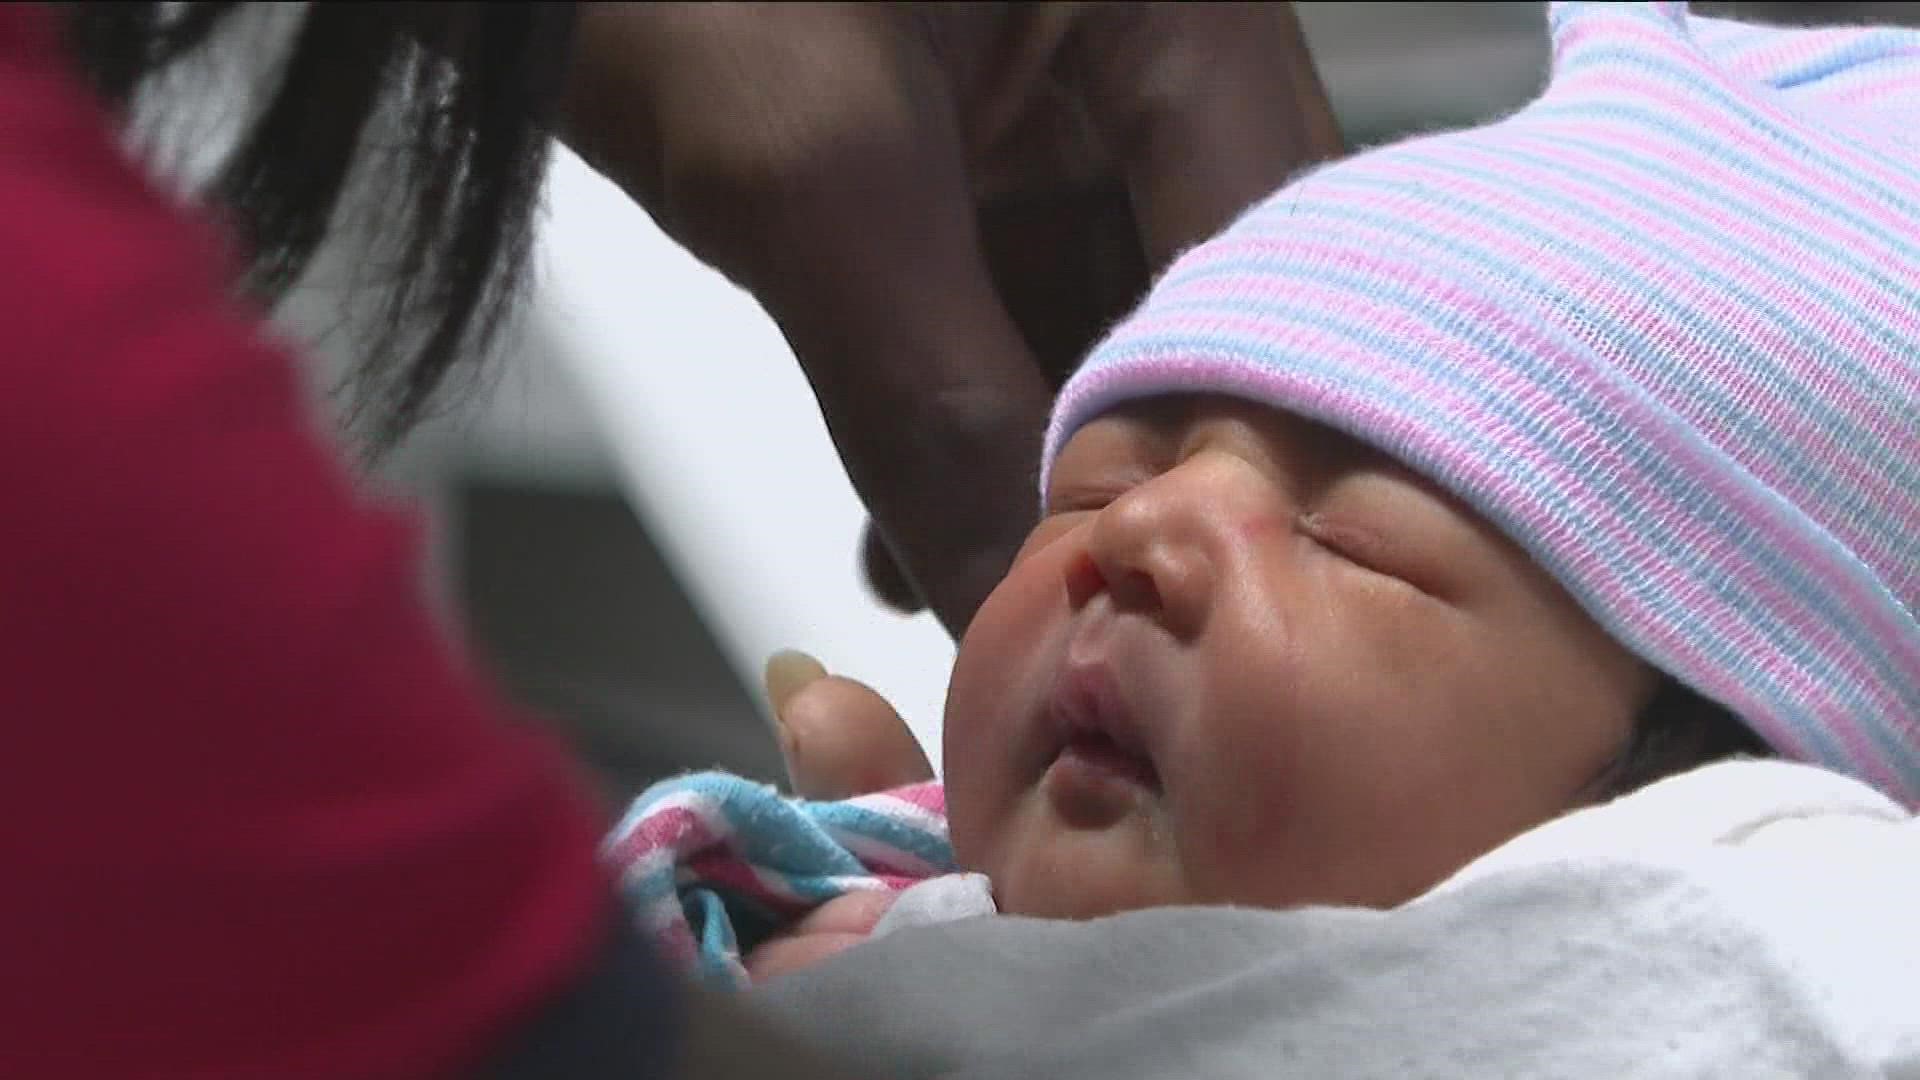 The McDonald's employees gave the baby girl a fitting name: Little Nugget.